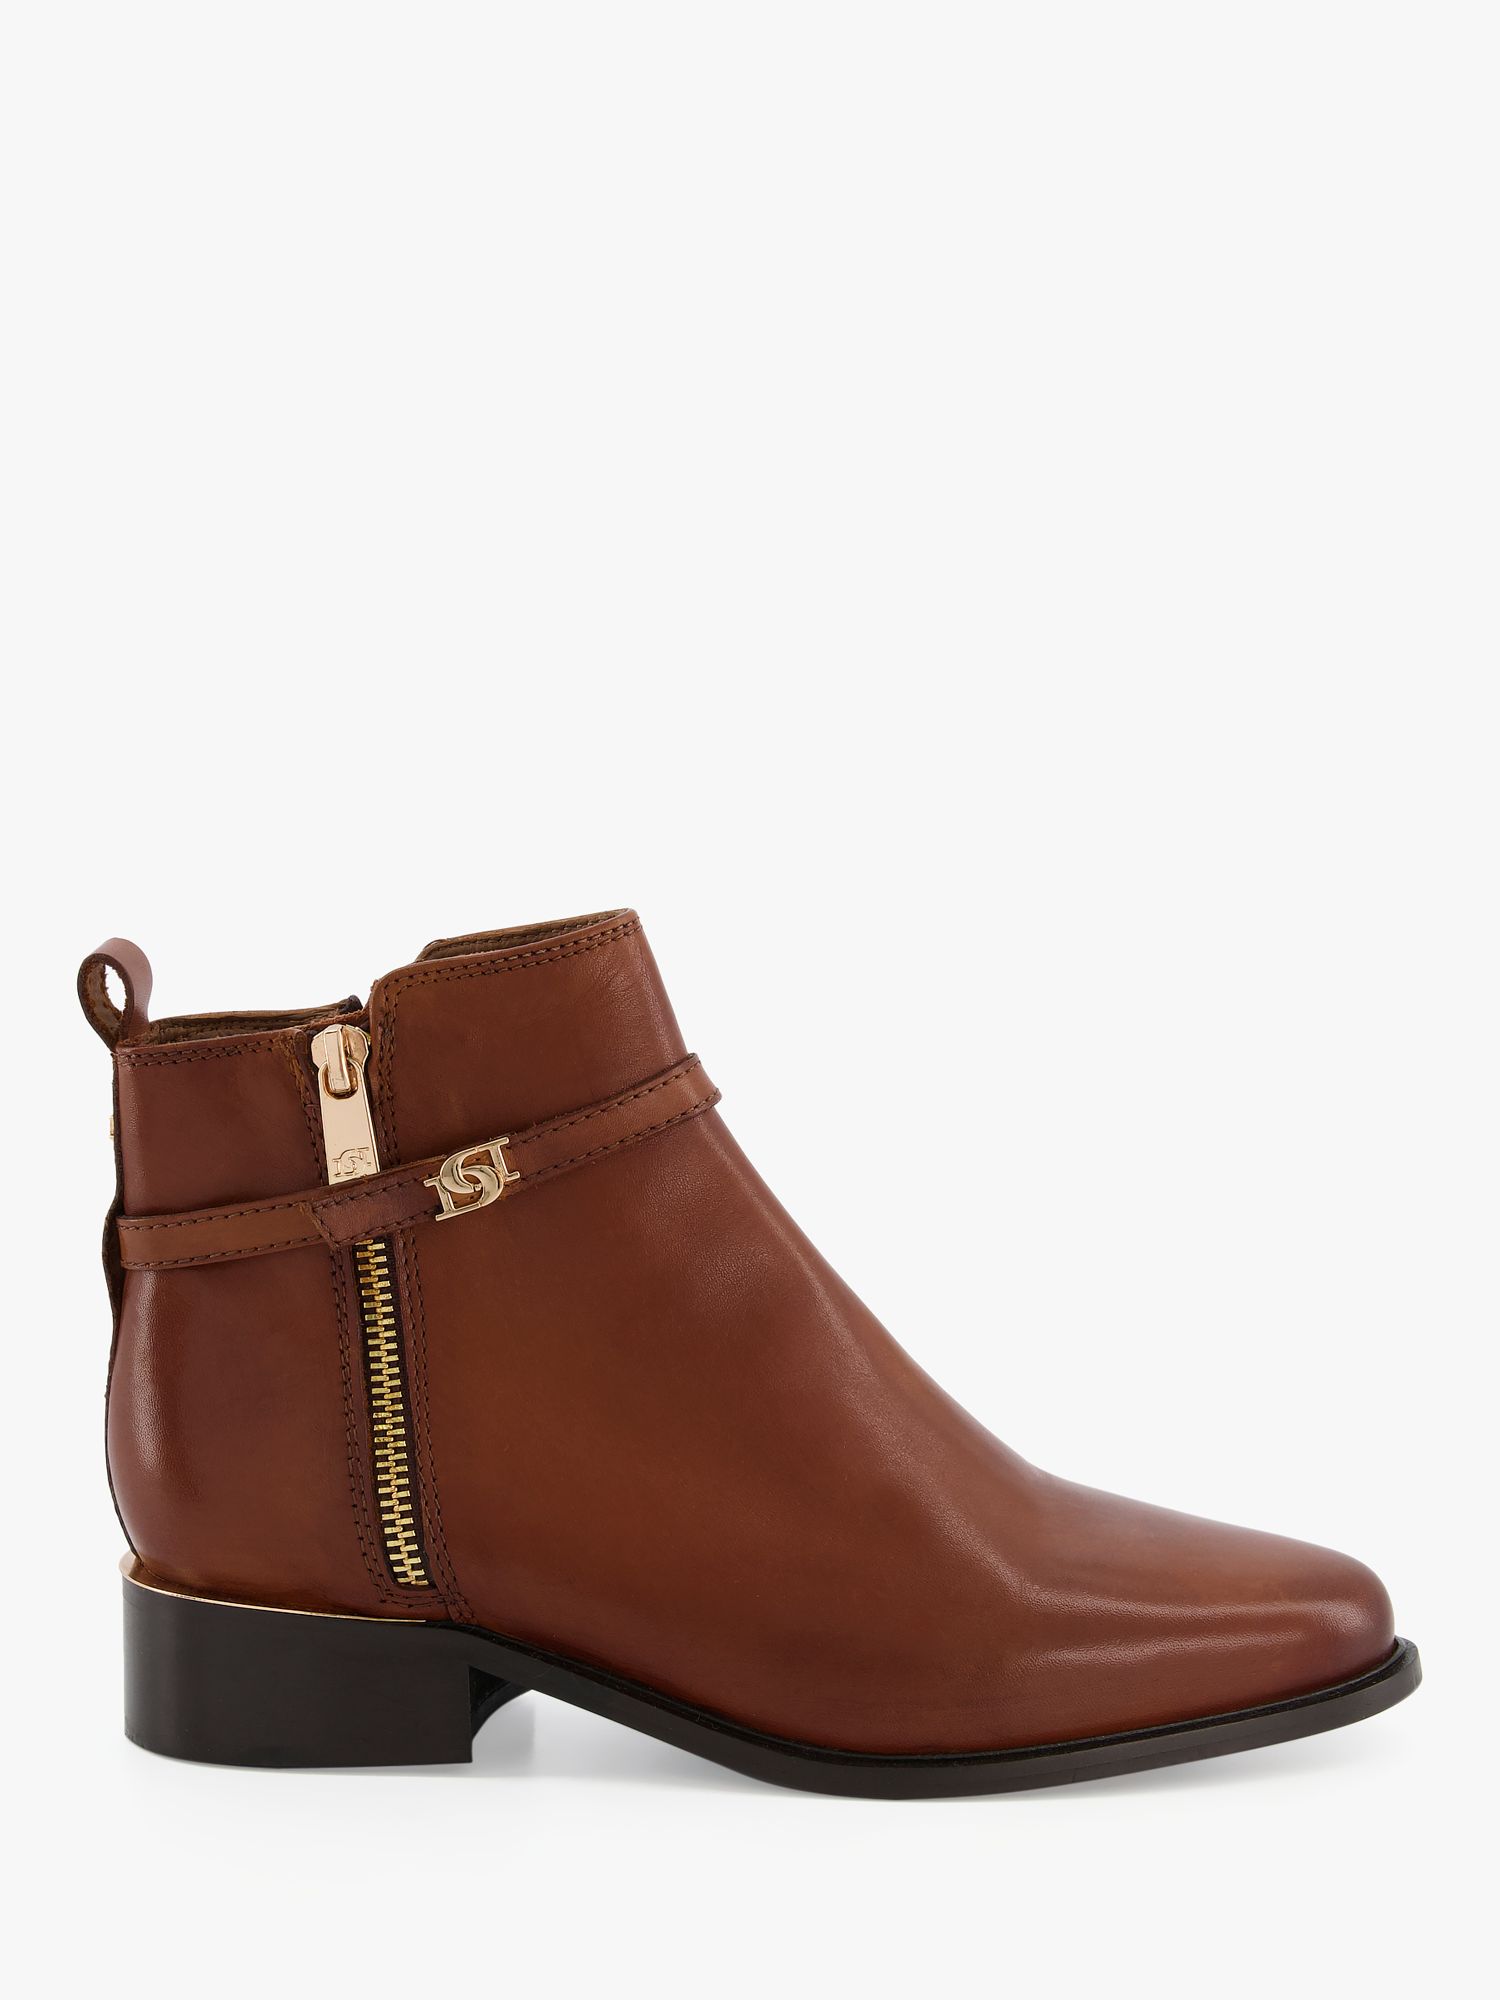 Dune Wide Fit Pap Leather Ankle Boots, Tan-leather at John Lewis & Partners